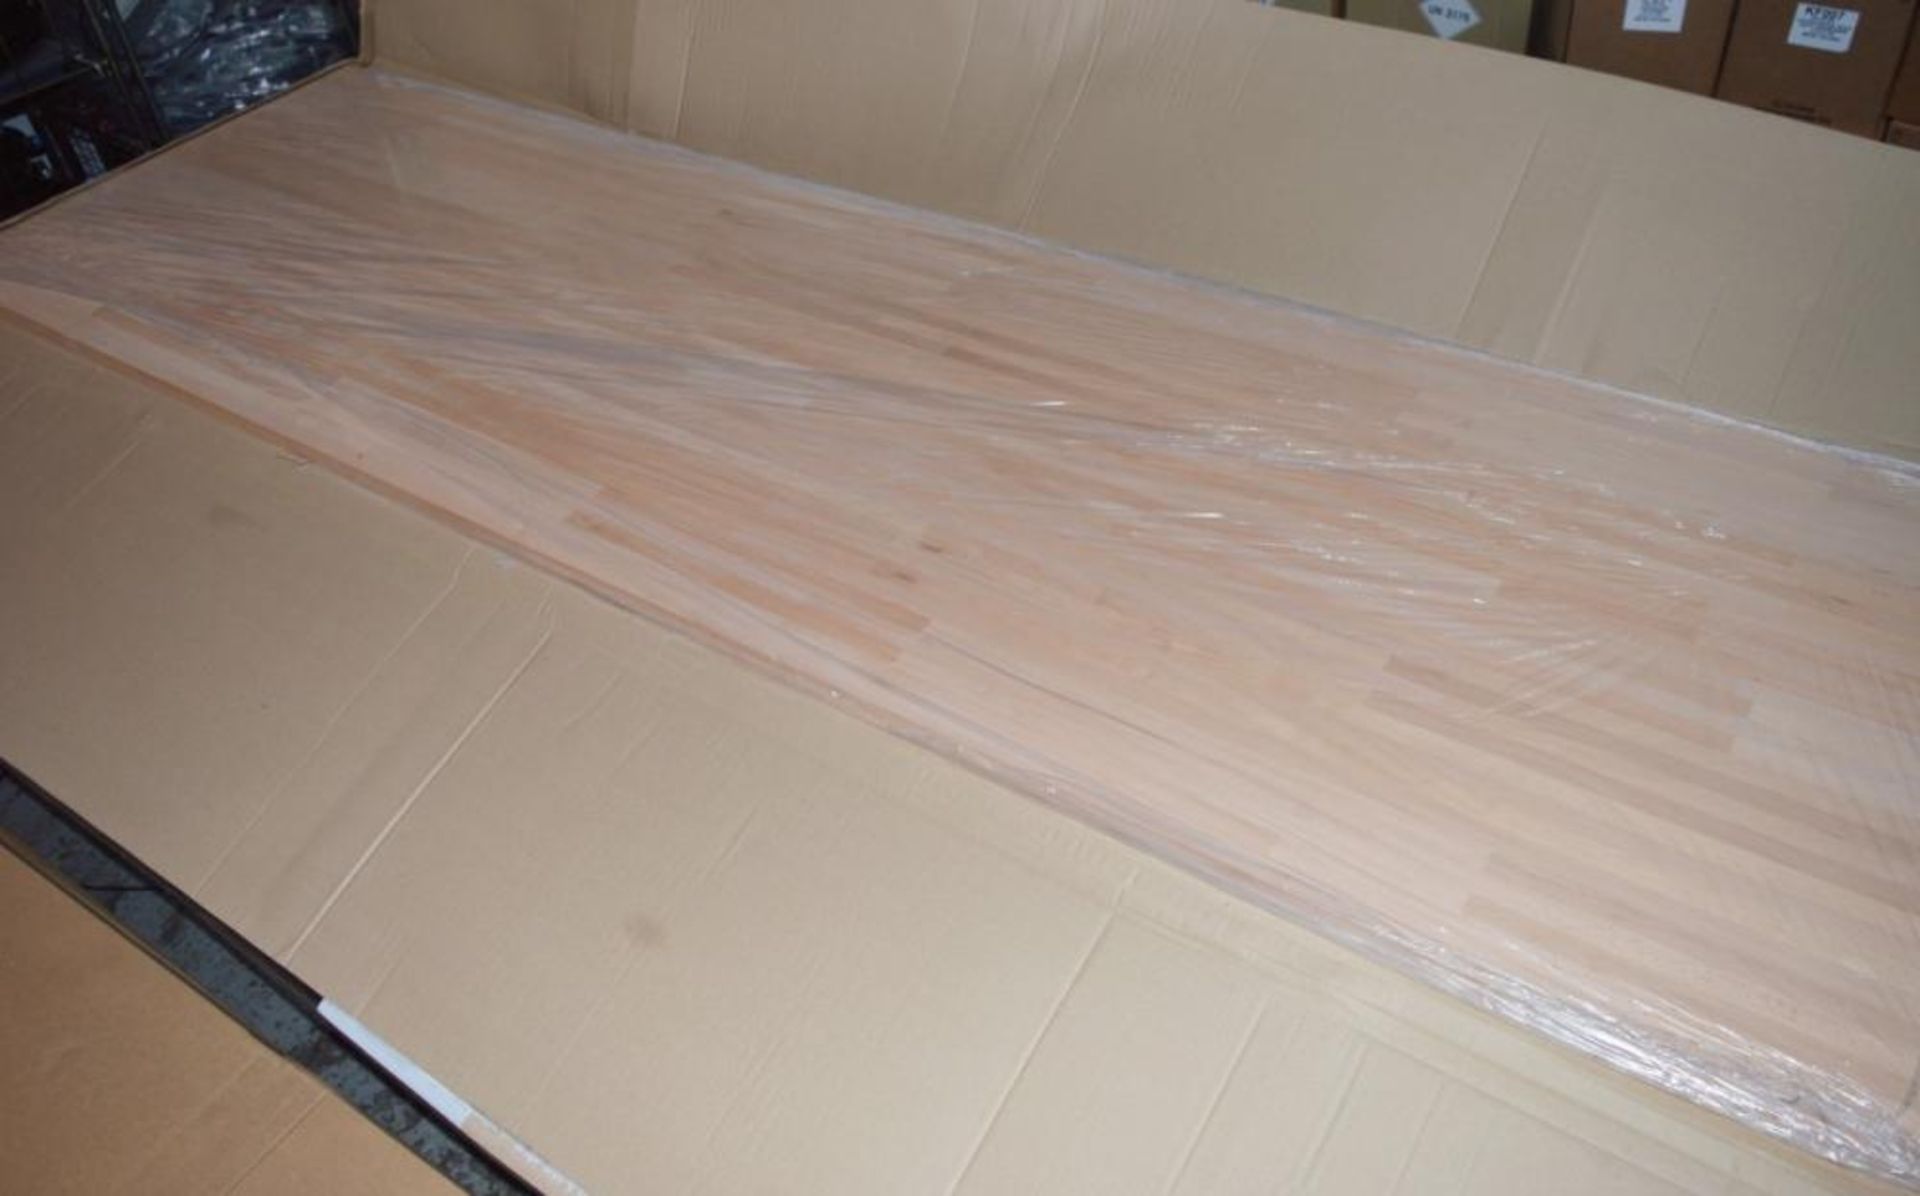 1 x Solid Wood Kitchen Worktop - PRIME BEECH - First Grade Finger Jointed Kitchen Worktop - Size: - Image 4 of 5